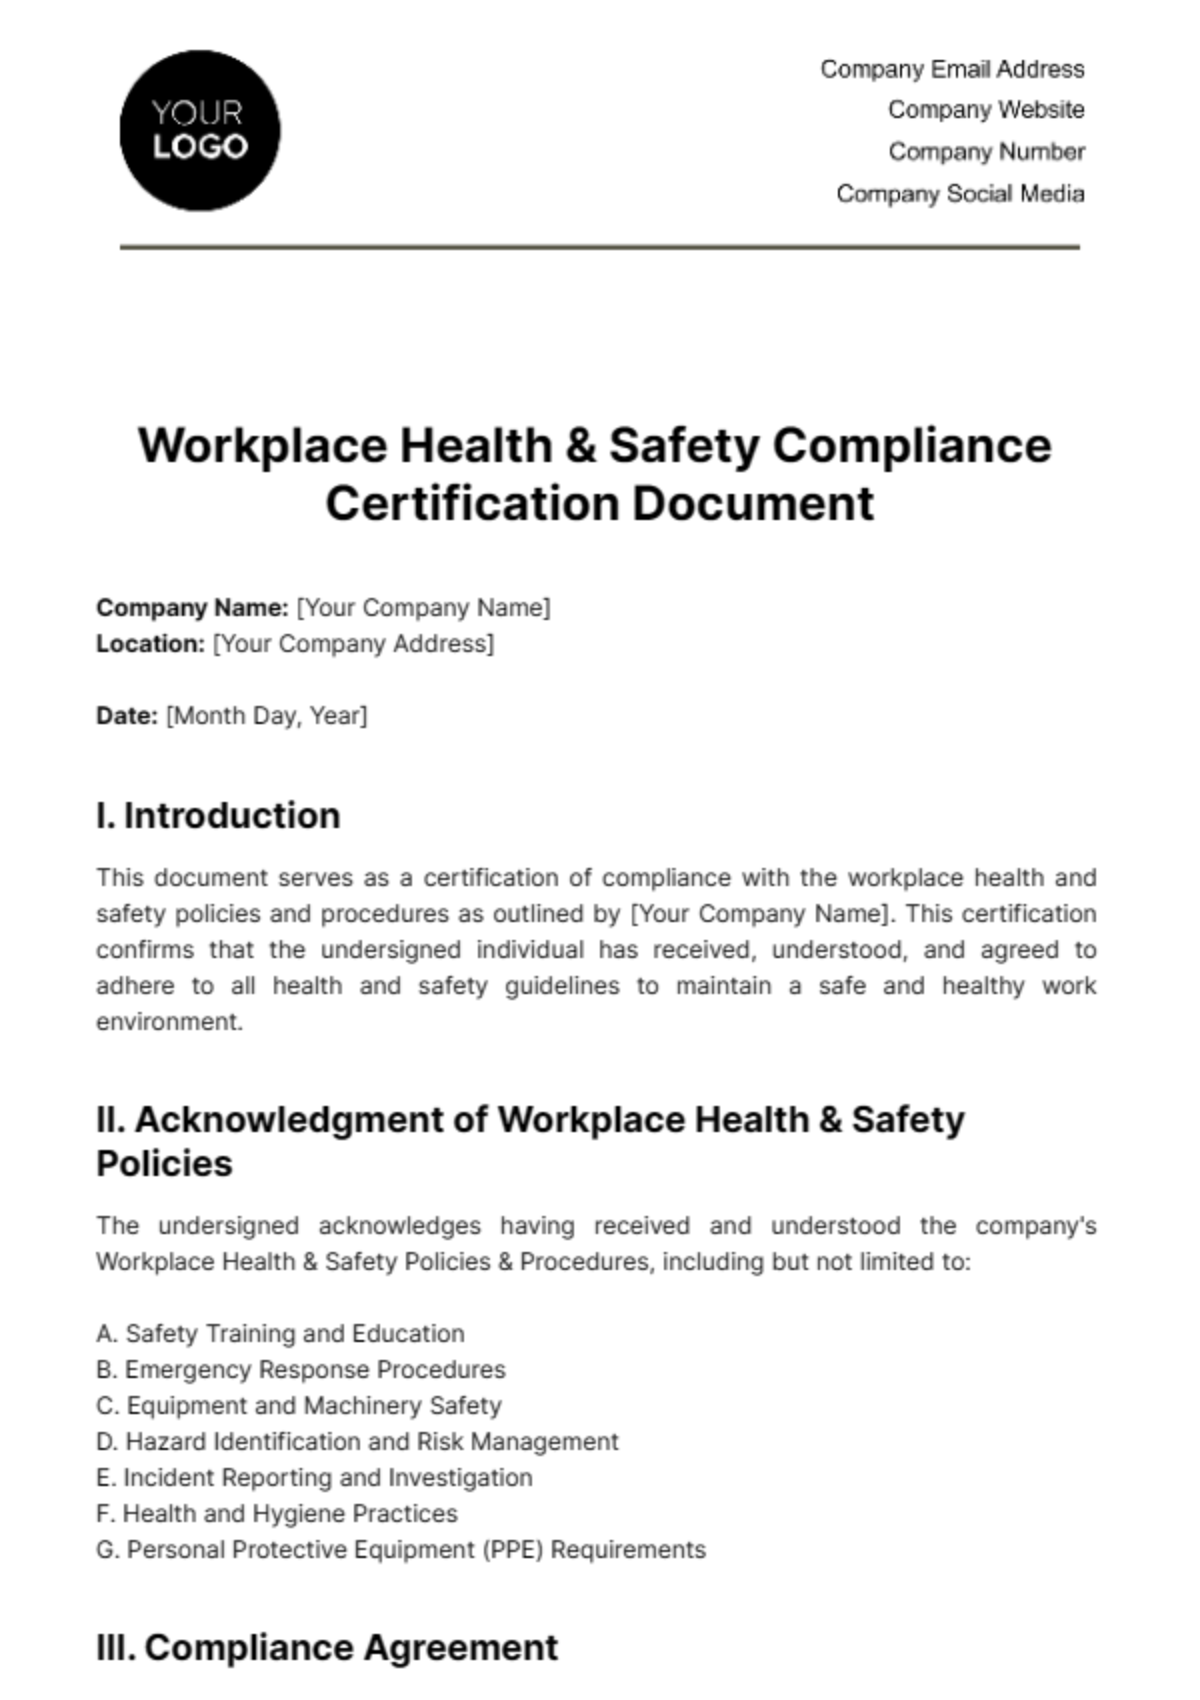 Free Workplace Health & Safety Compliance Certification Document Template